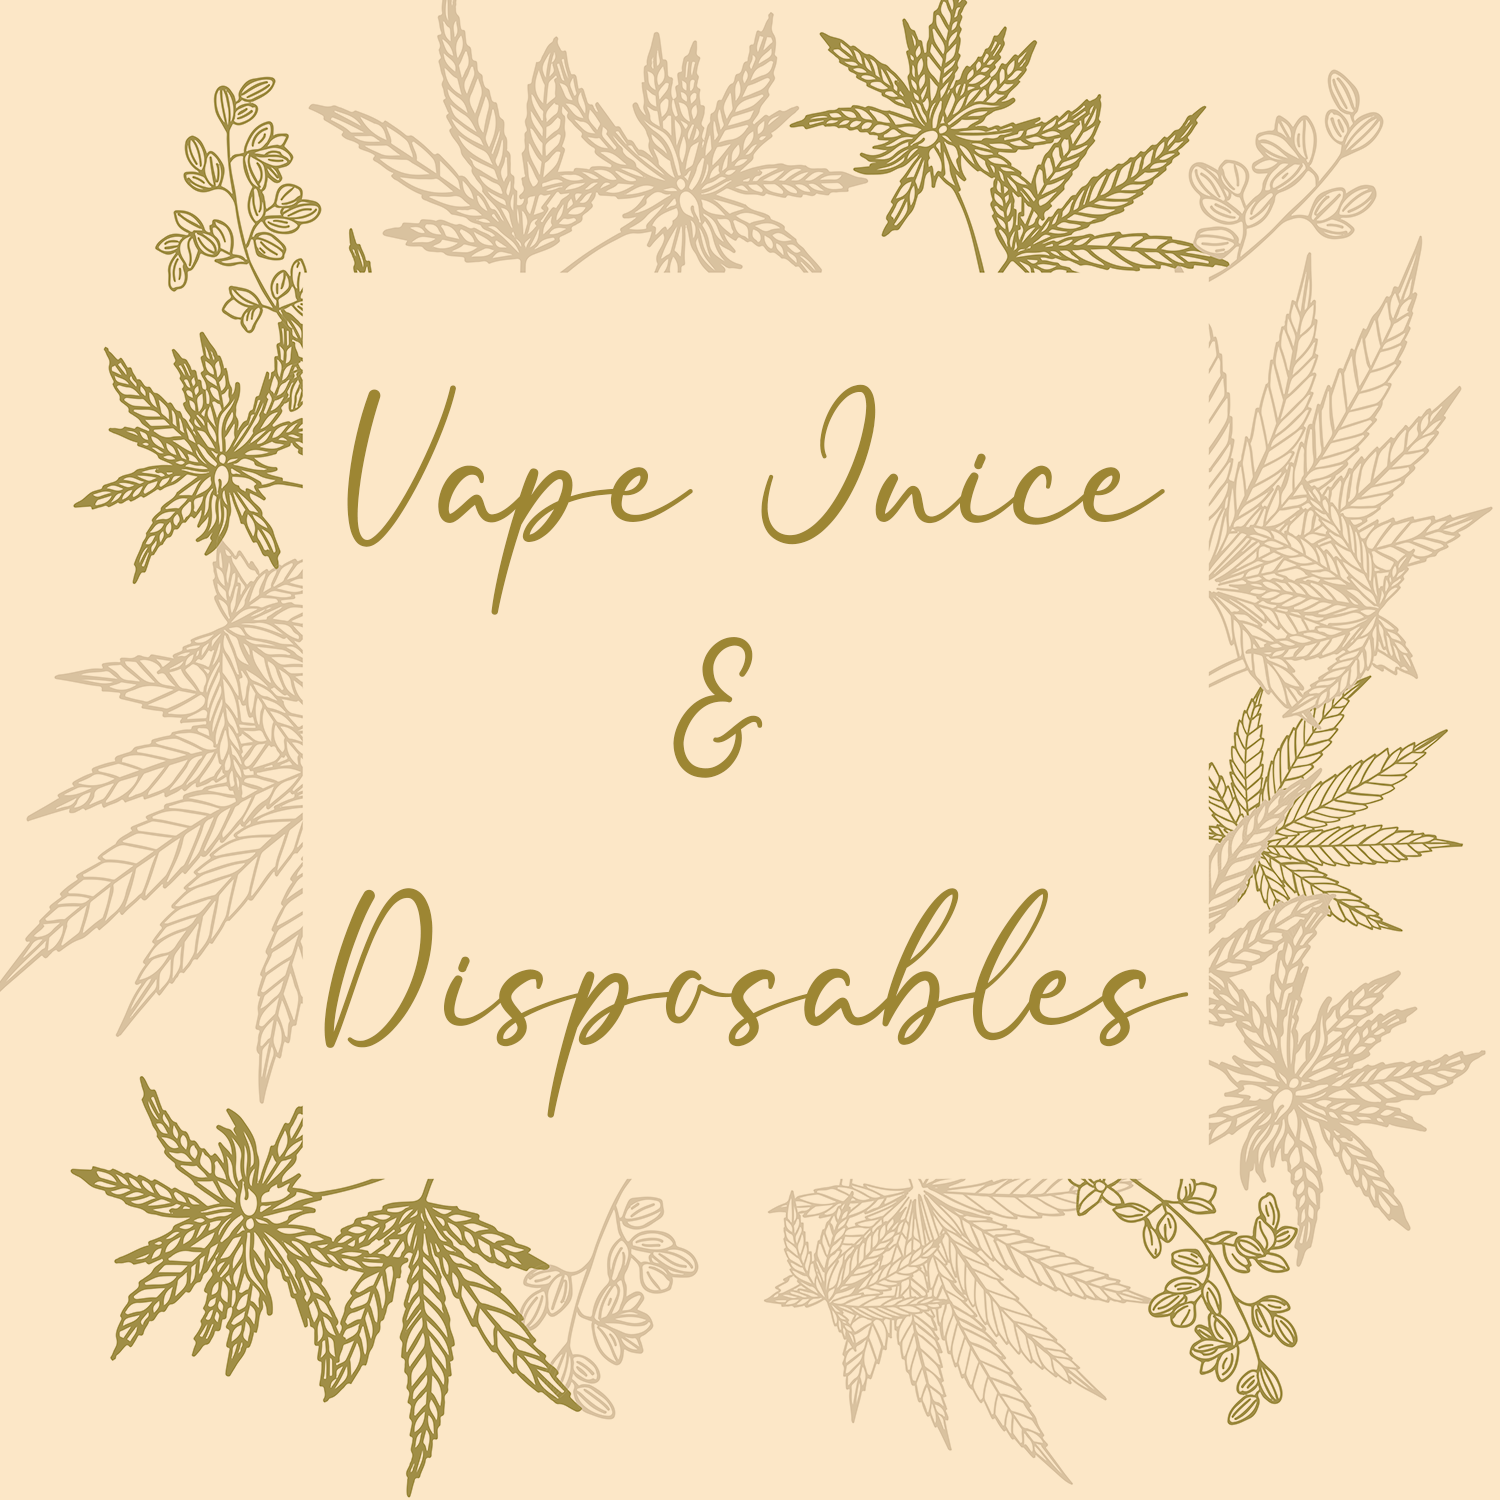 Vape juice and disposables